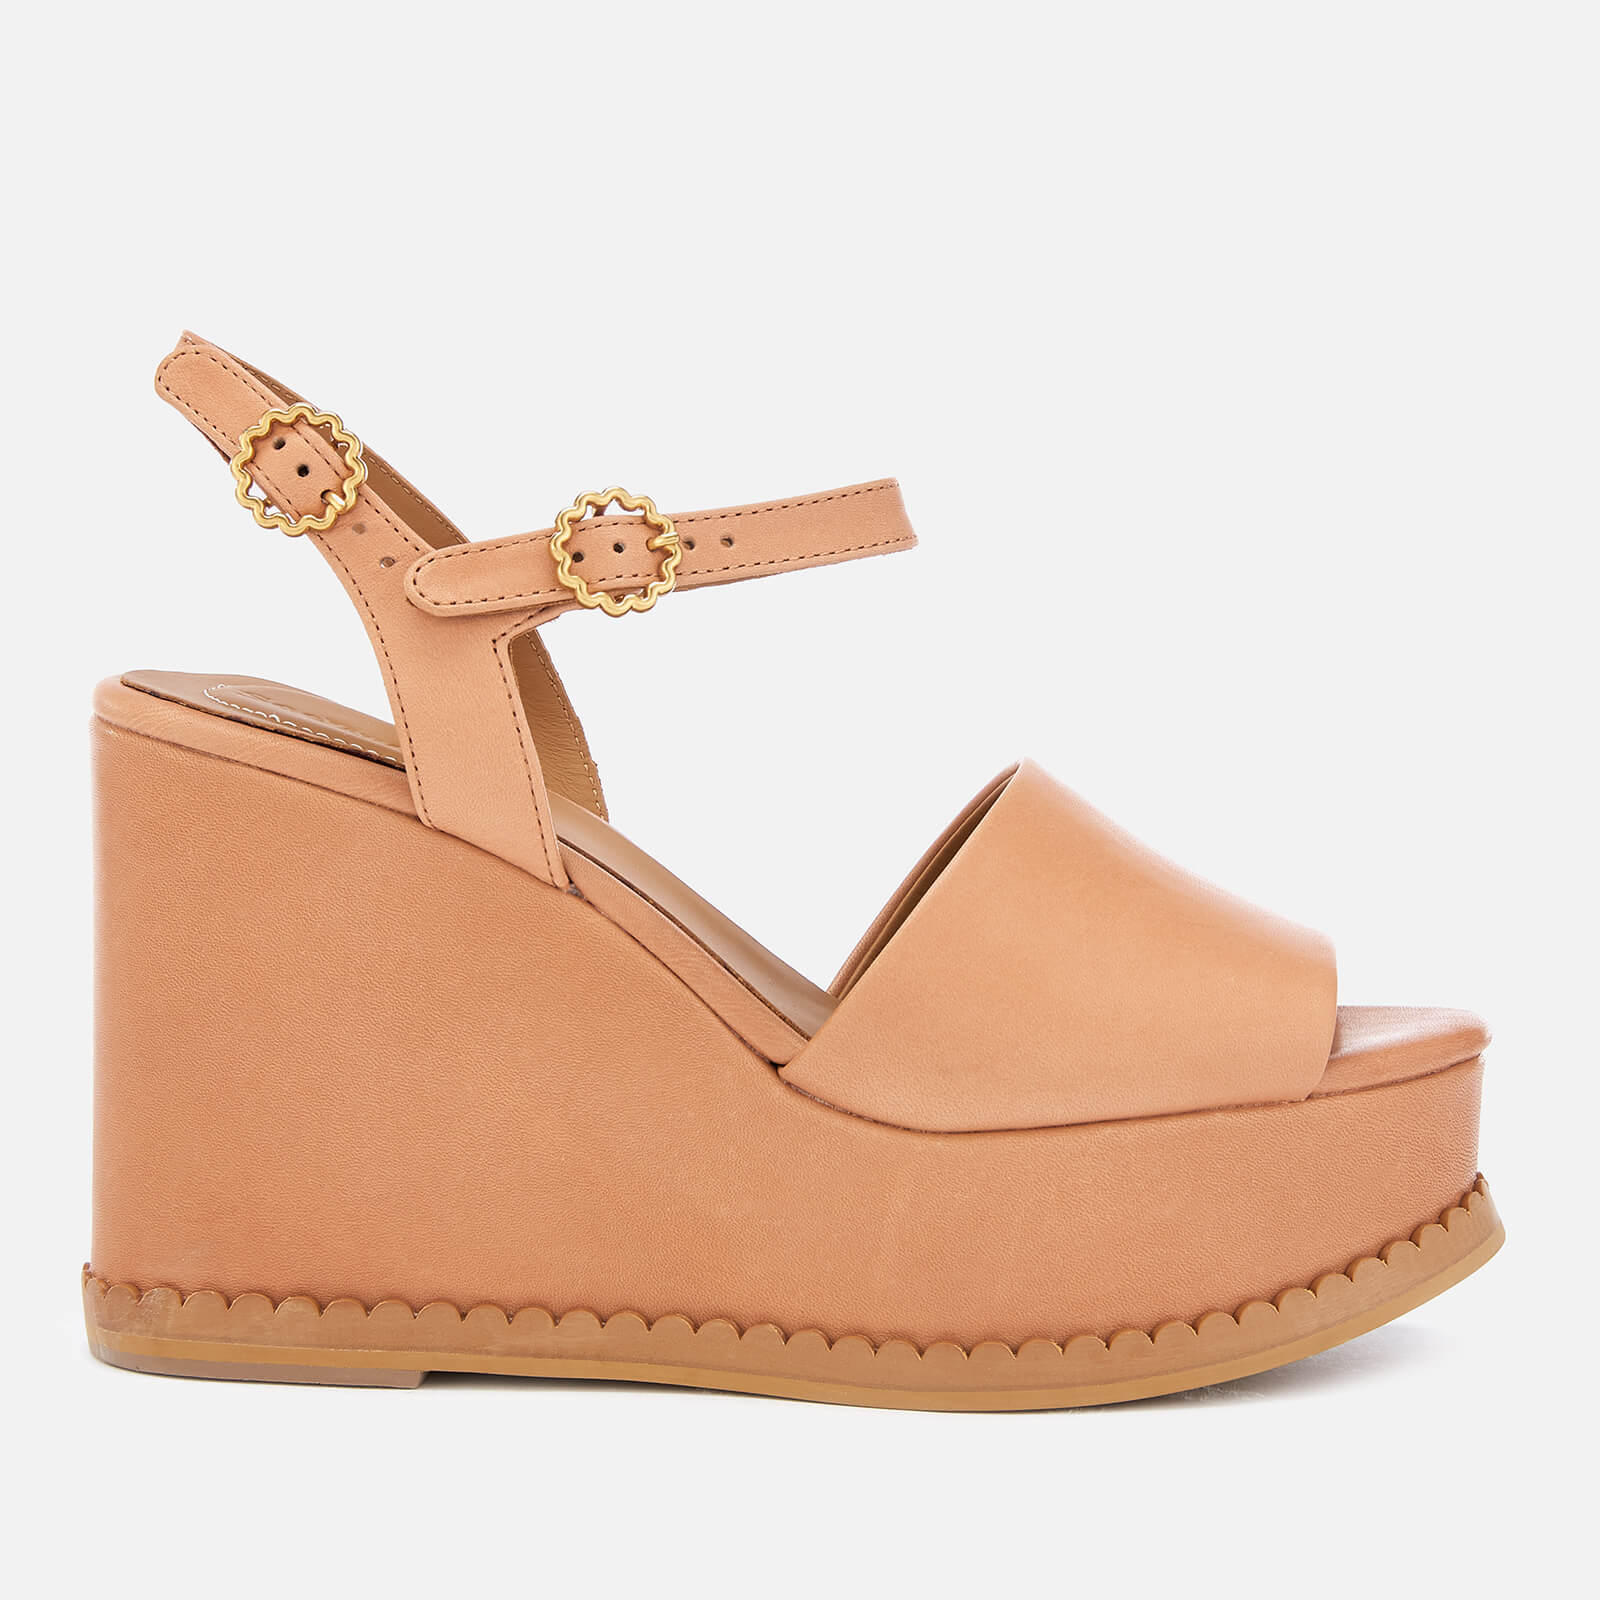 See By Chloé Women's Carrie Leather Wedge Sandals - Sierra